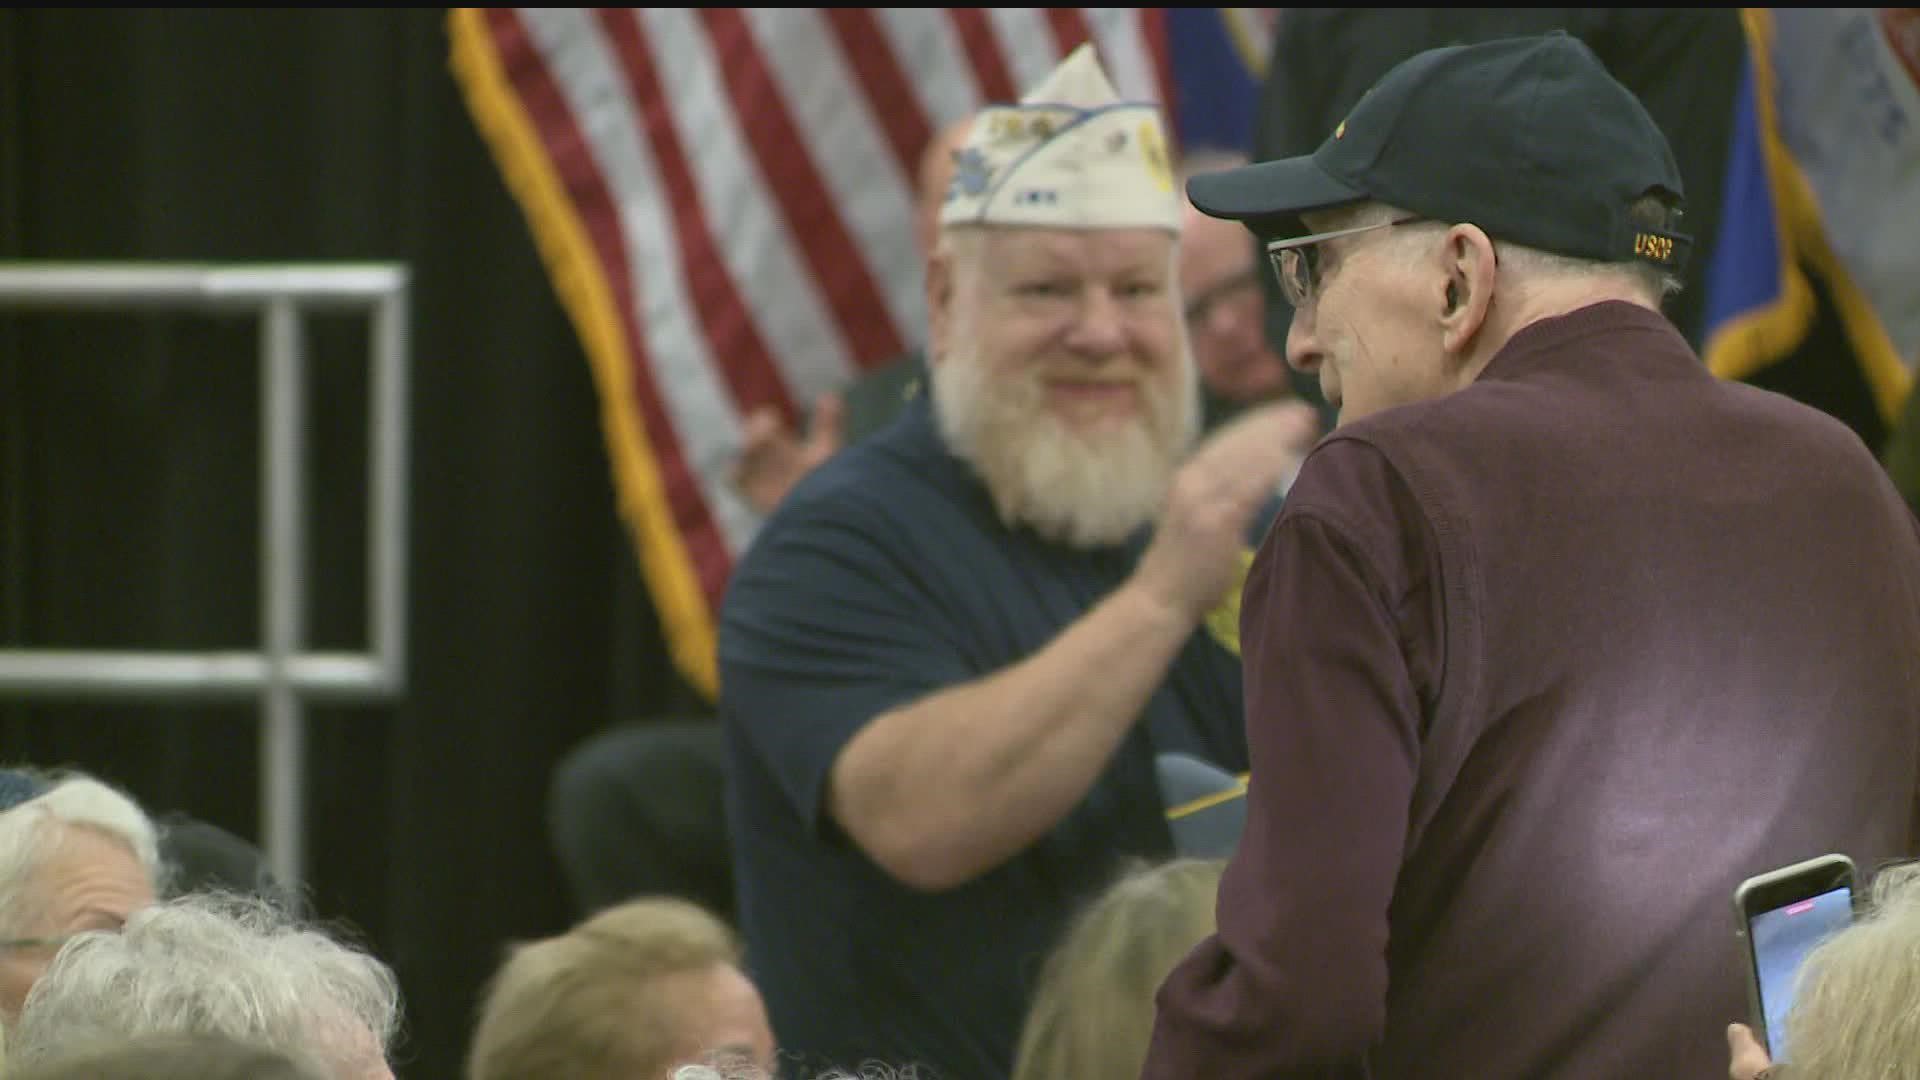 After two years of virtual ceremonies, Minnesota's official Veterans Day event was in person again. Political leaders and veterans gathered in Inver Grove Heights.